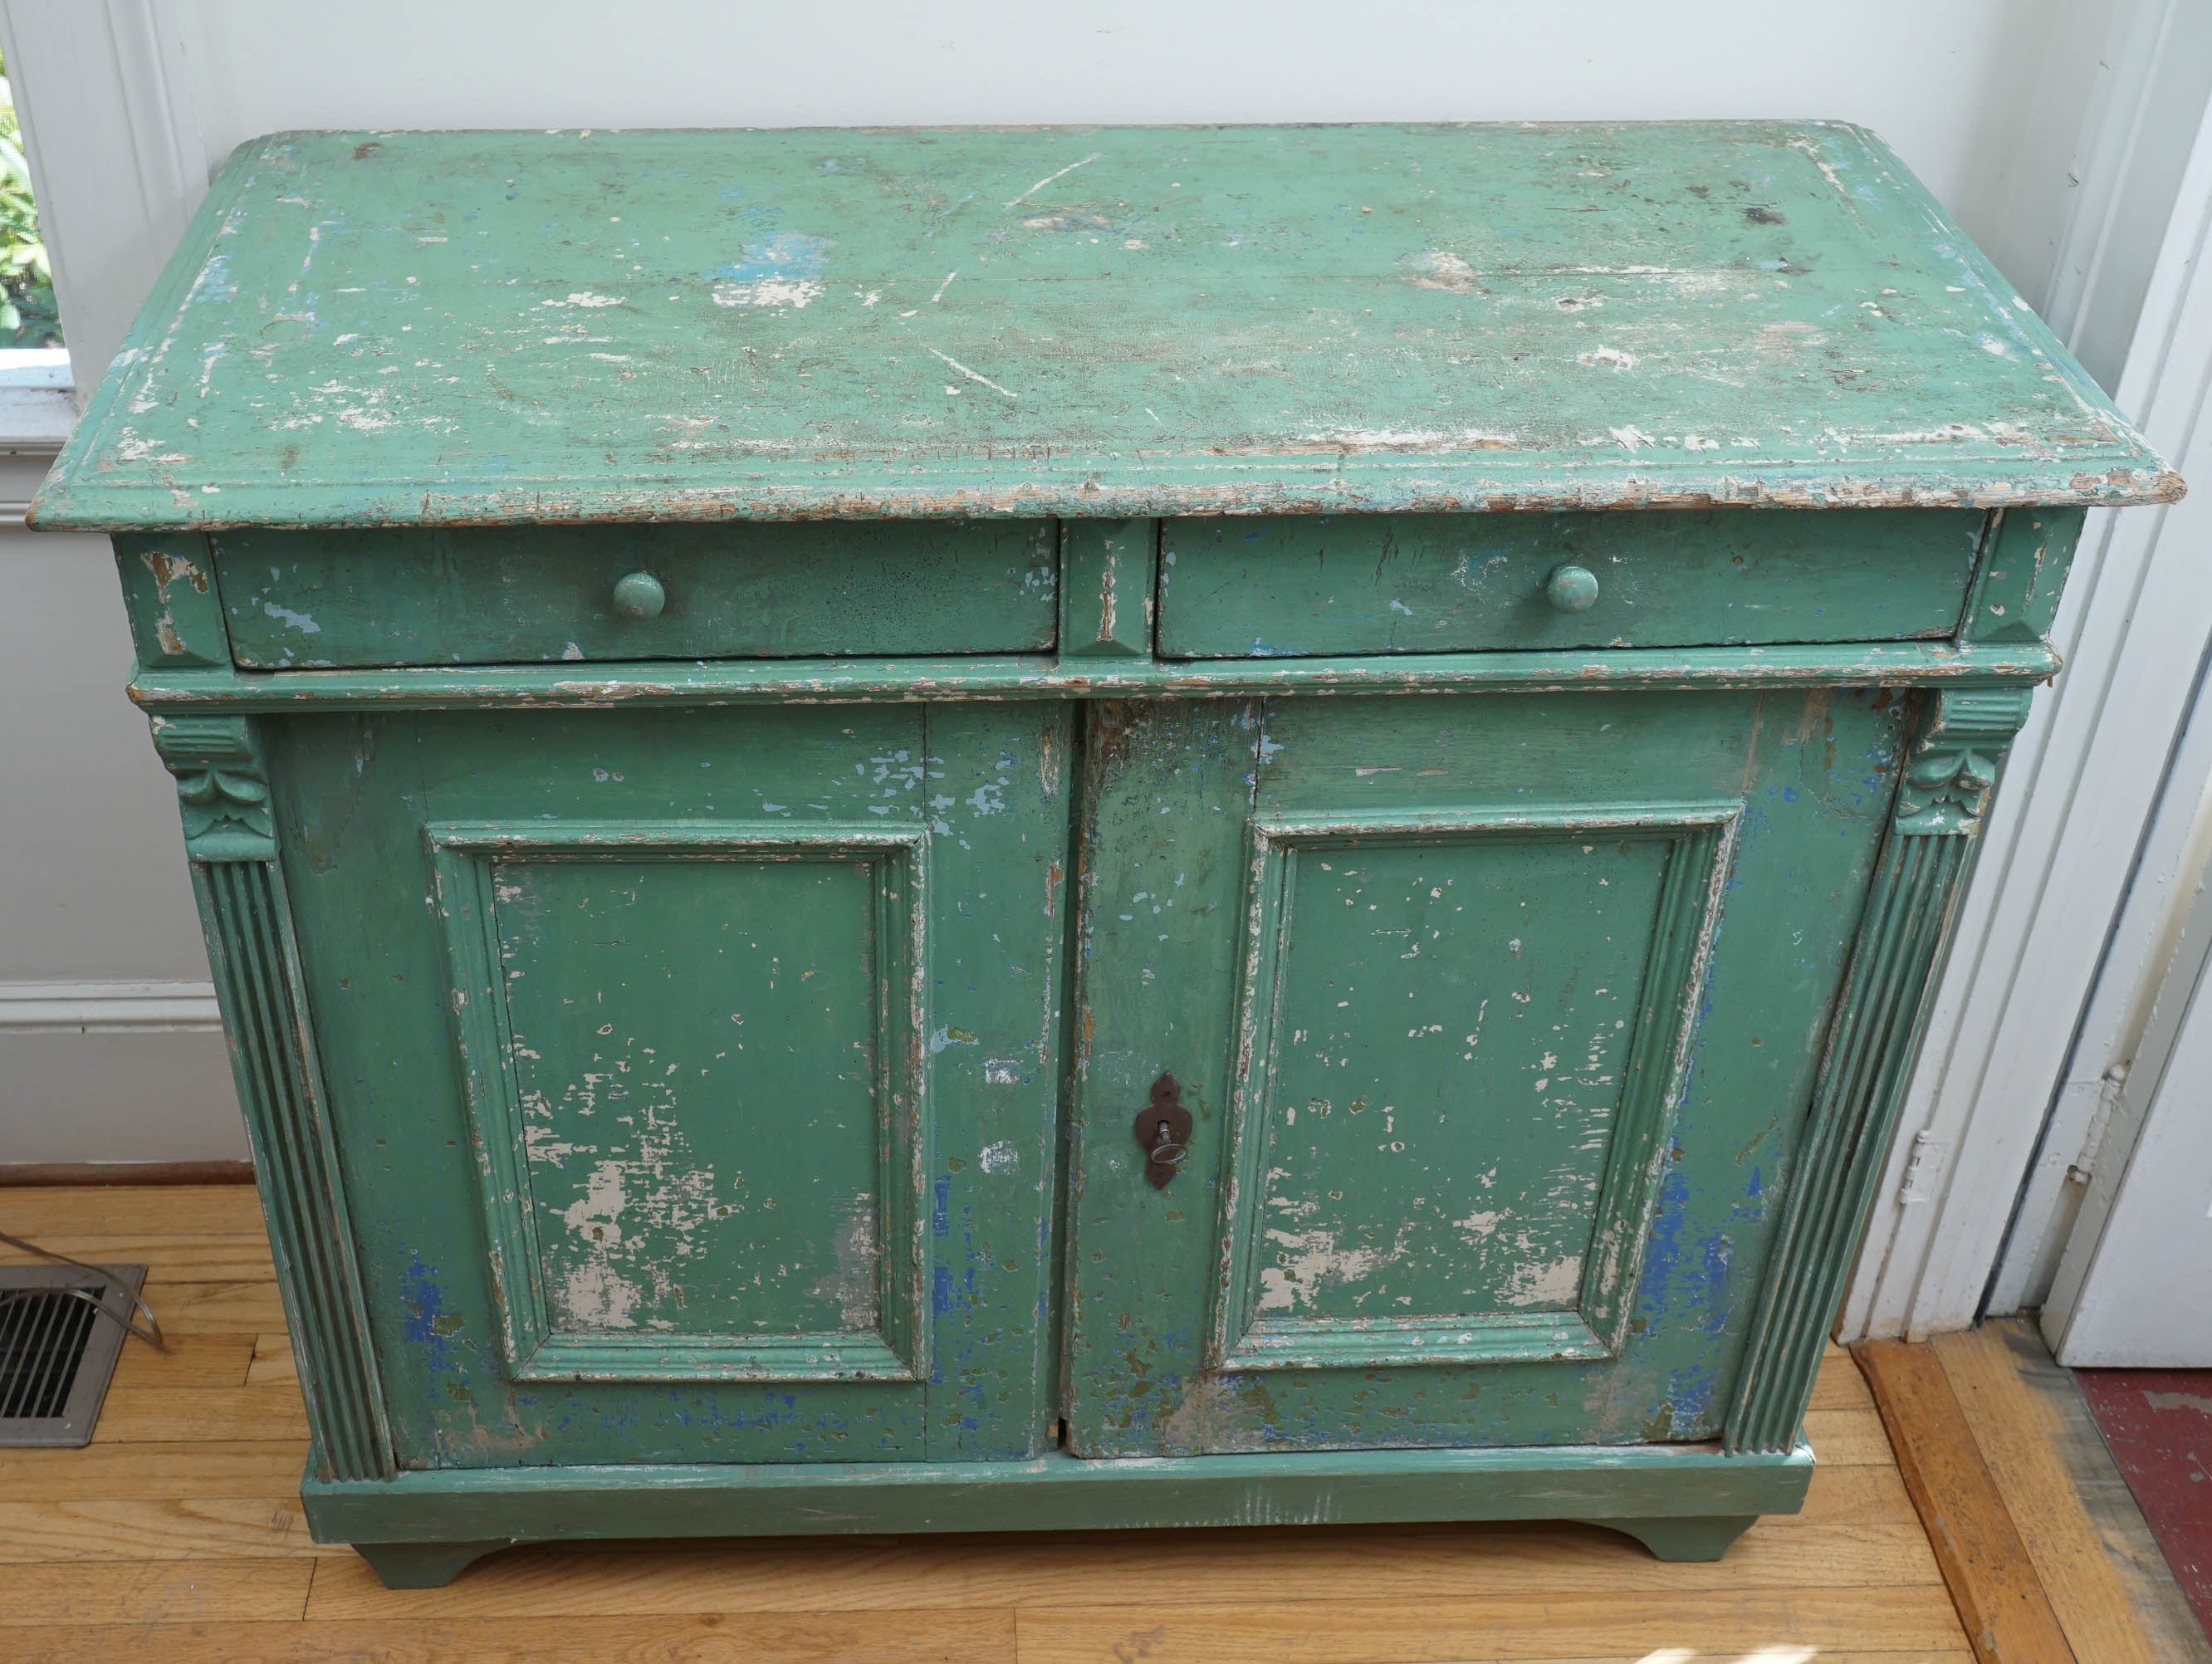 It is the color green, combined with the fluting on the front of each side that will attract your attention the most on this two-drawer, two-door buffet. Complete with original lock and key, this is a stunning piece from one of our favorite French